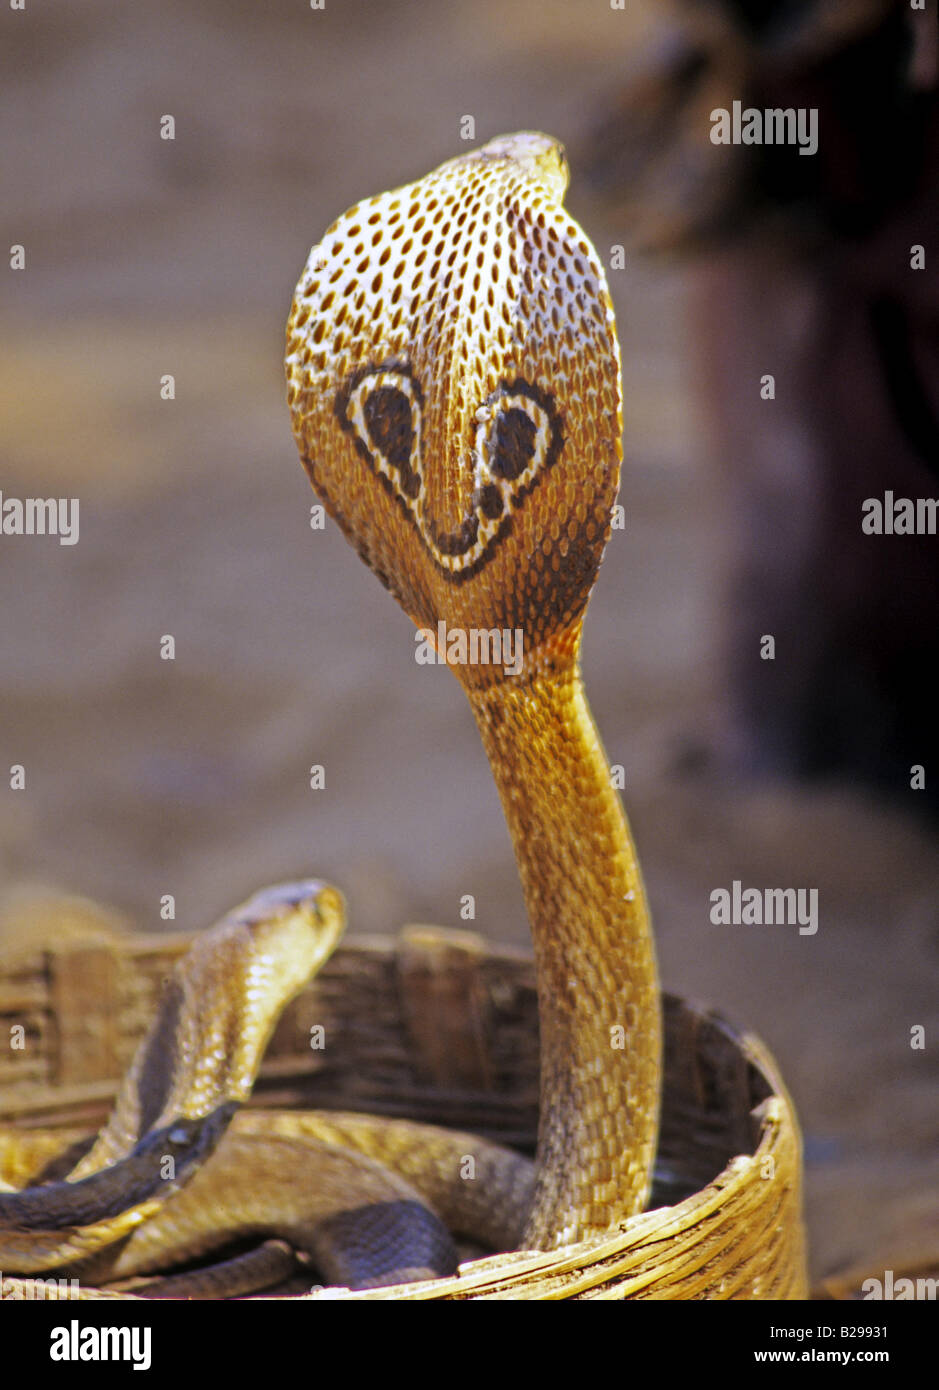 Hooded Cobra Goa State India Date 15 06 2008 Ref ZB548 115573 0096 COMPULSORY CREDIT World Pictures Photoshot Stock Photo